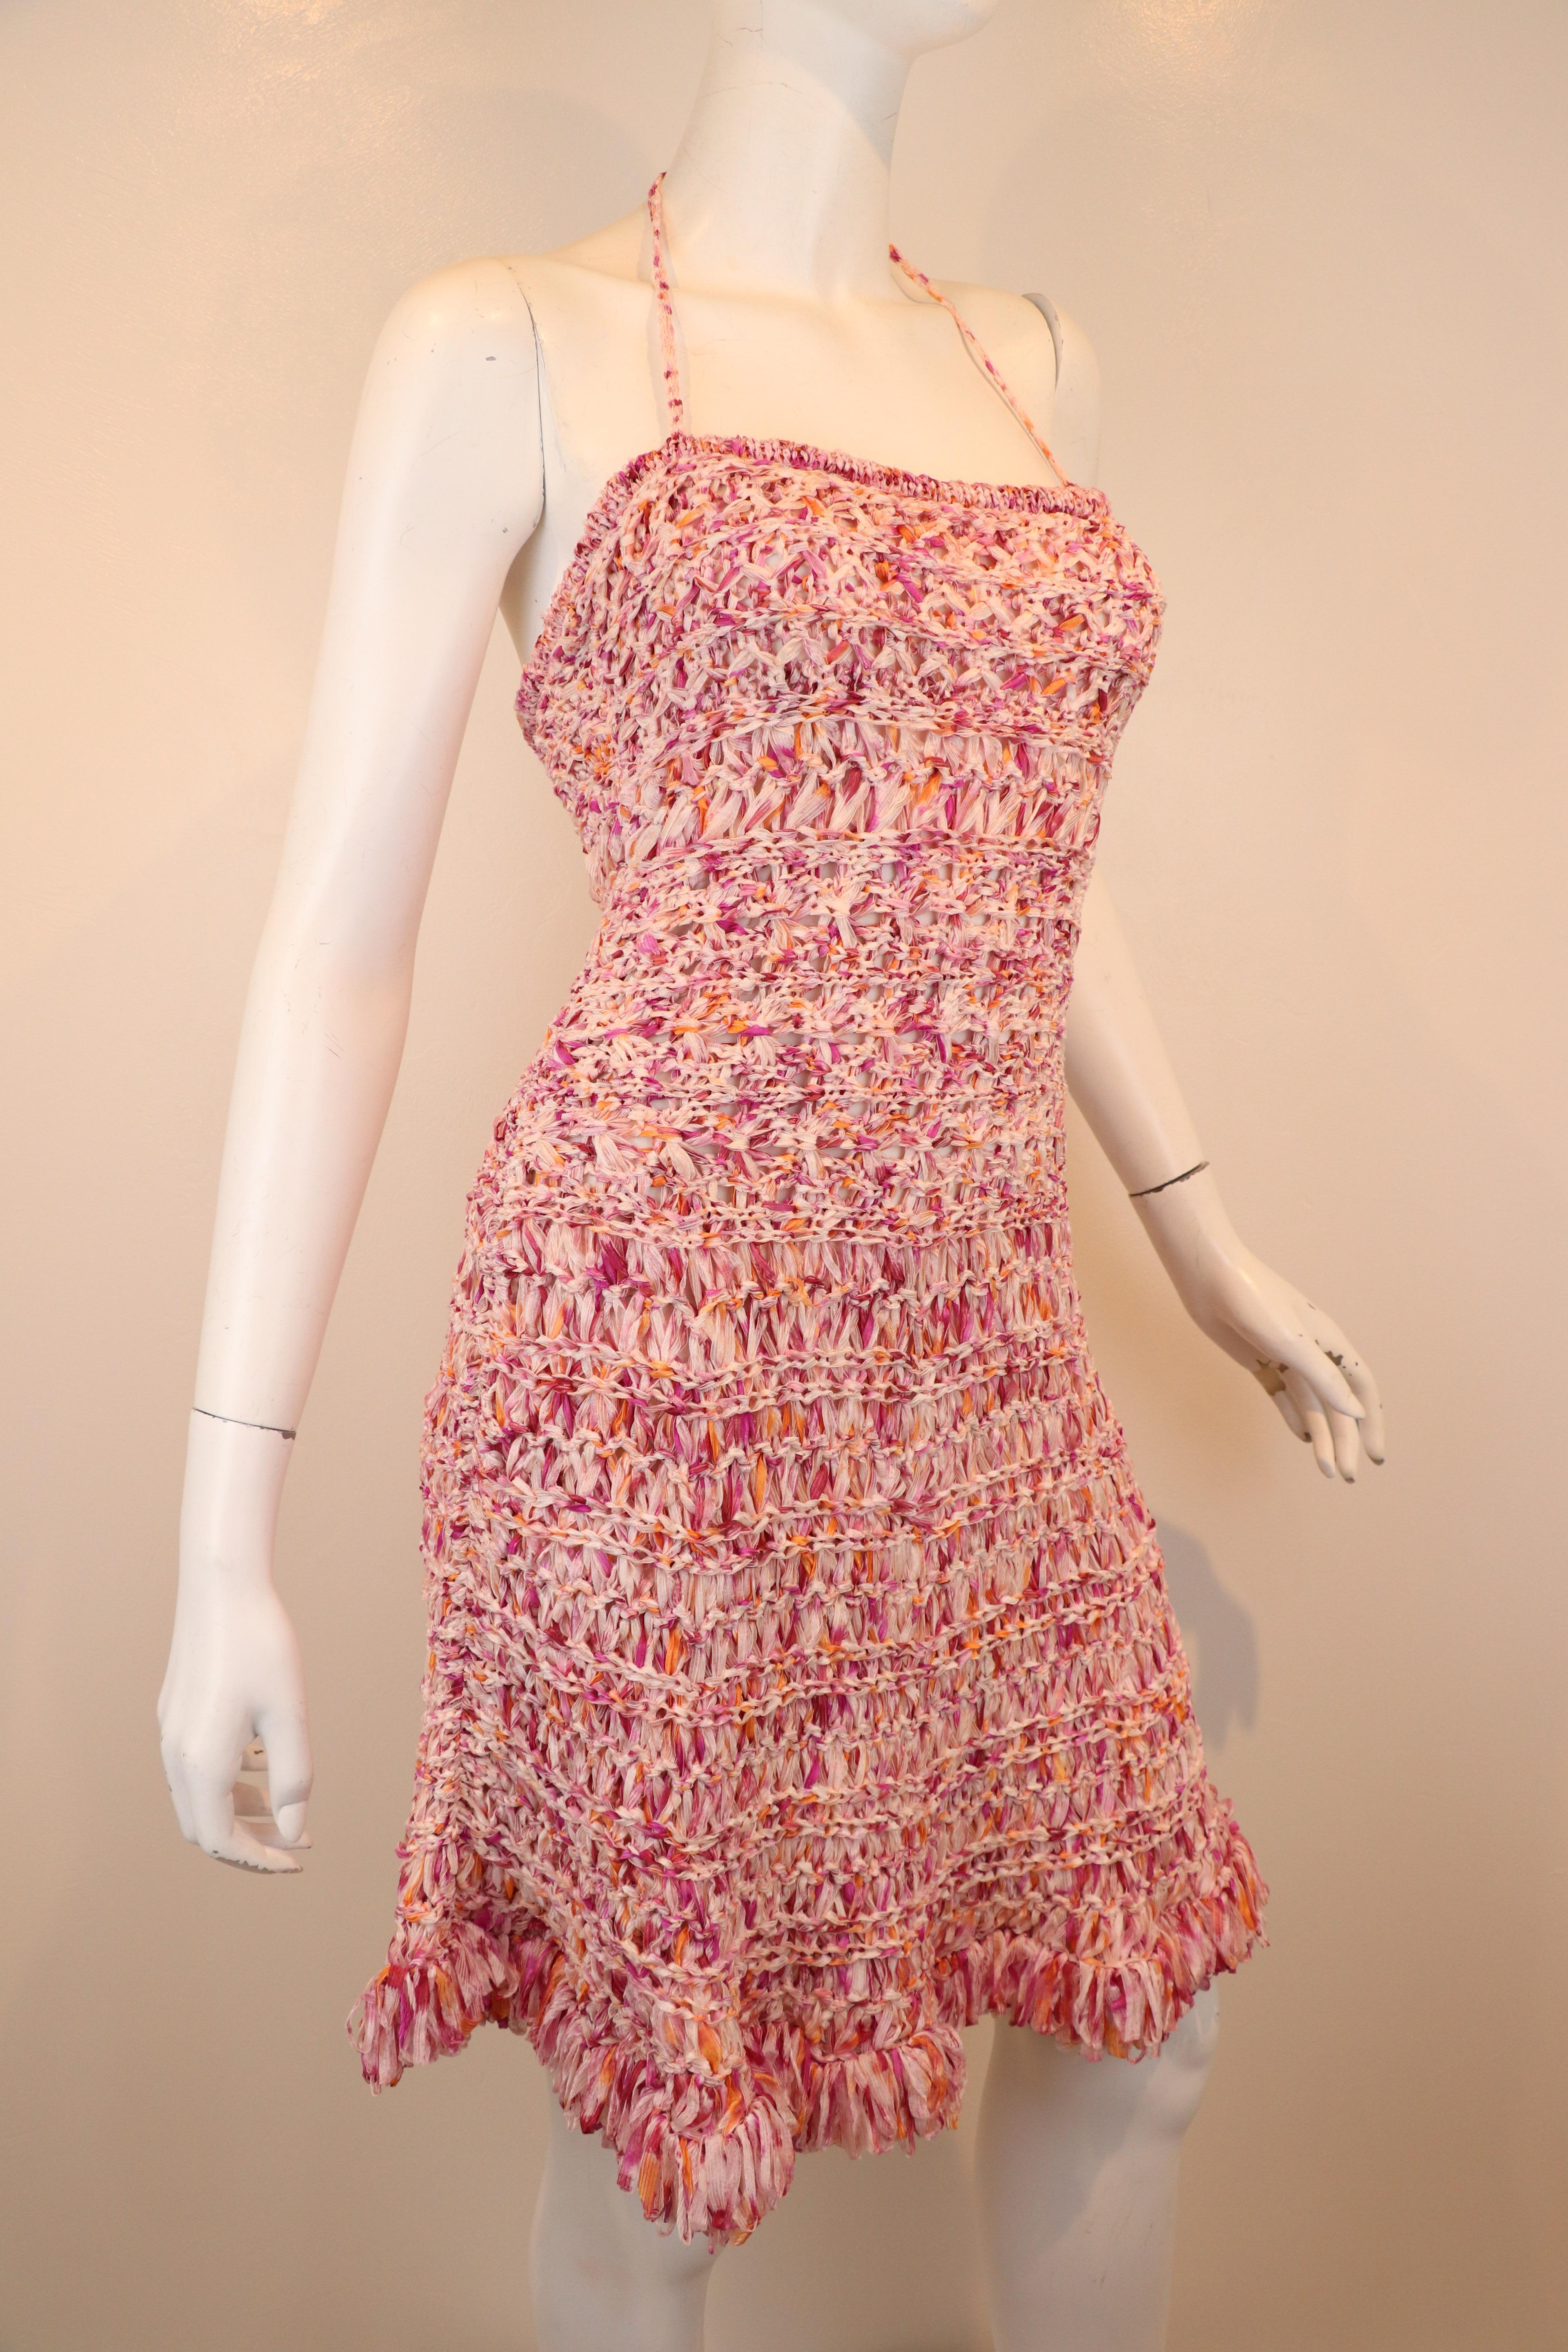 Christian Dior vintage 1990's crochet halter dress with flared skirt in coral and pink. Excellent condition. 
Bust Measurements: 32